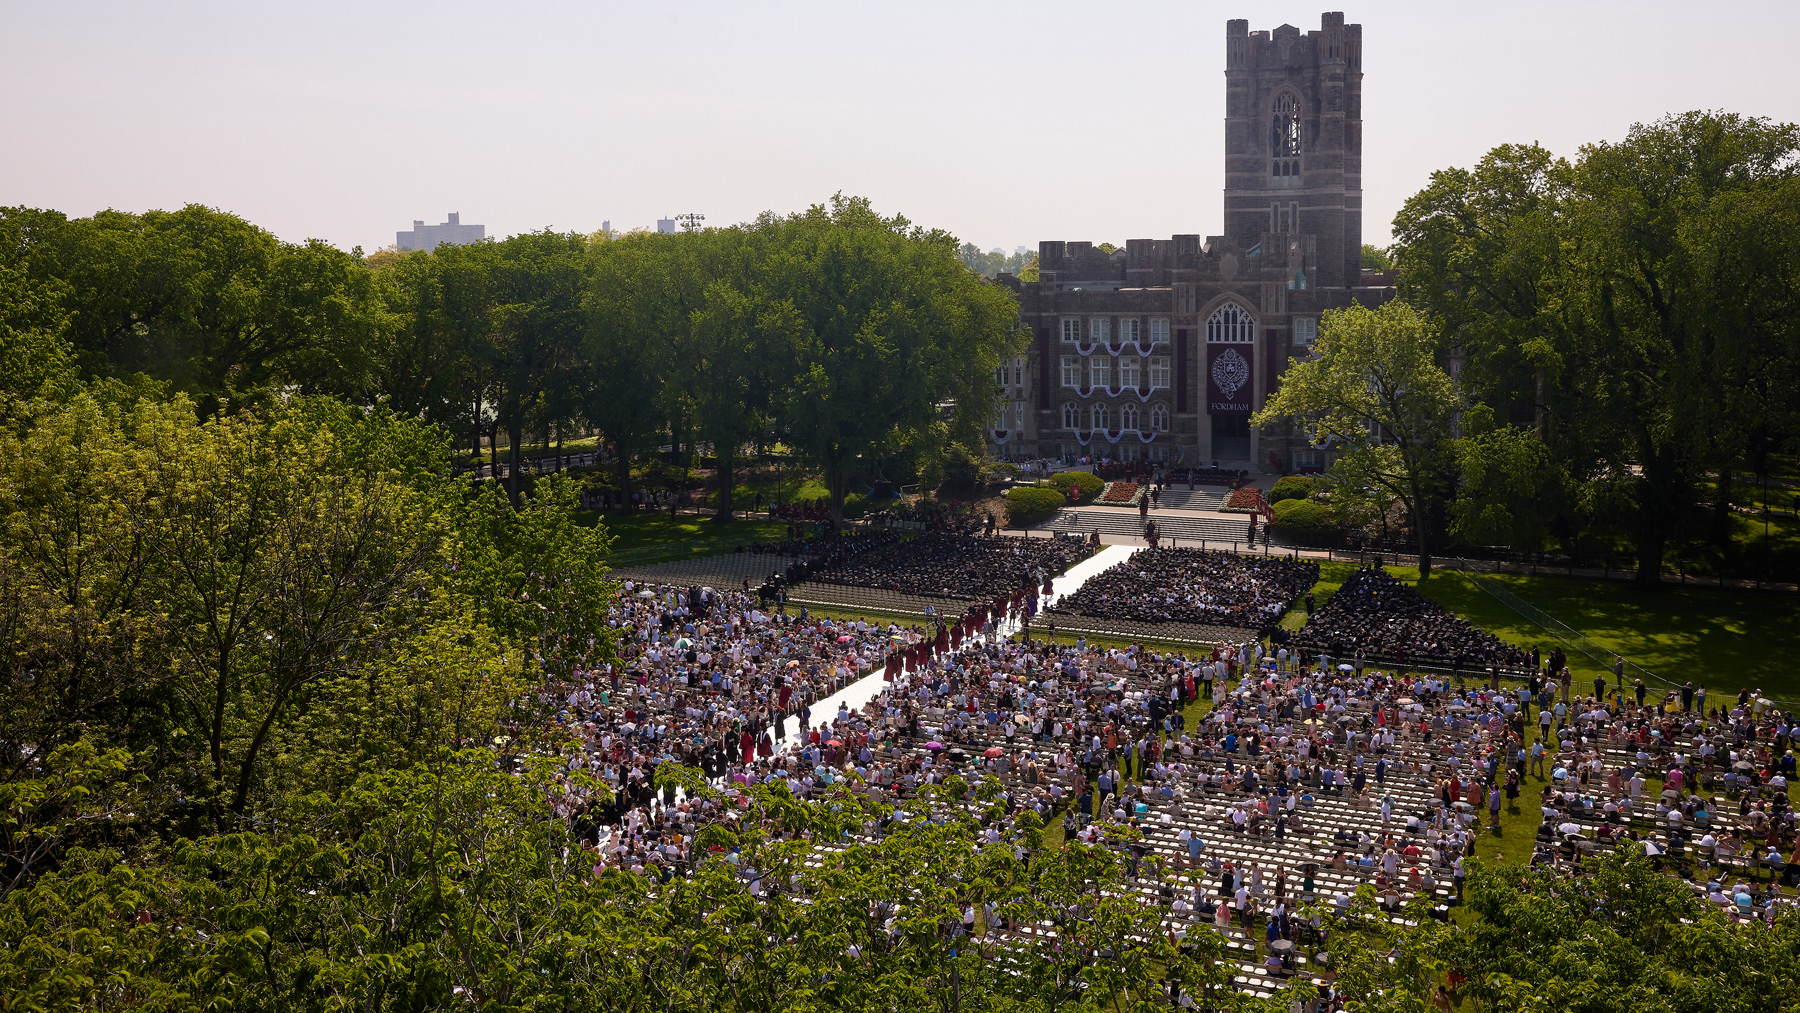 Crowd assembling on Edward's Parade for Commencement